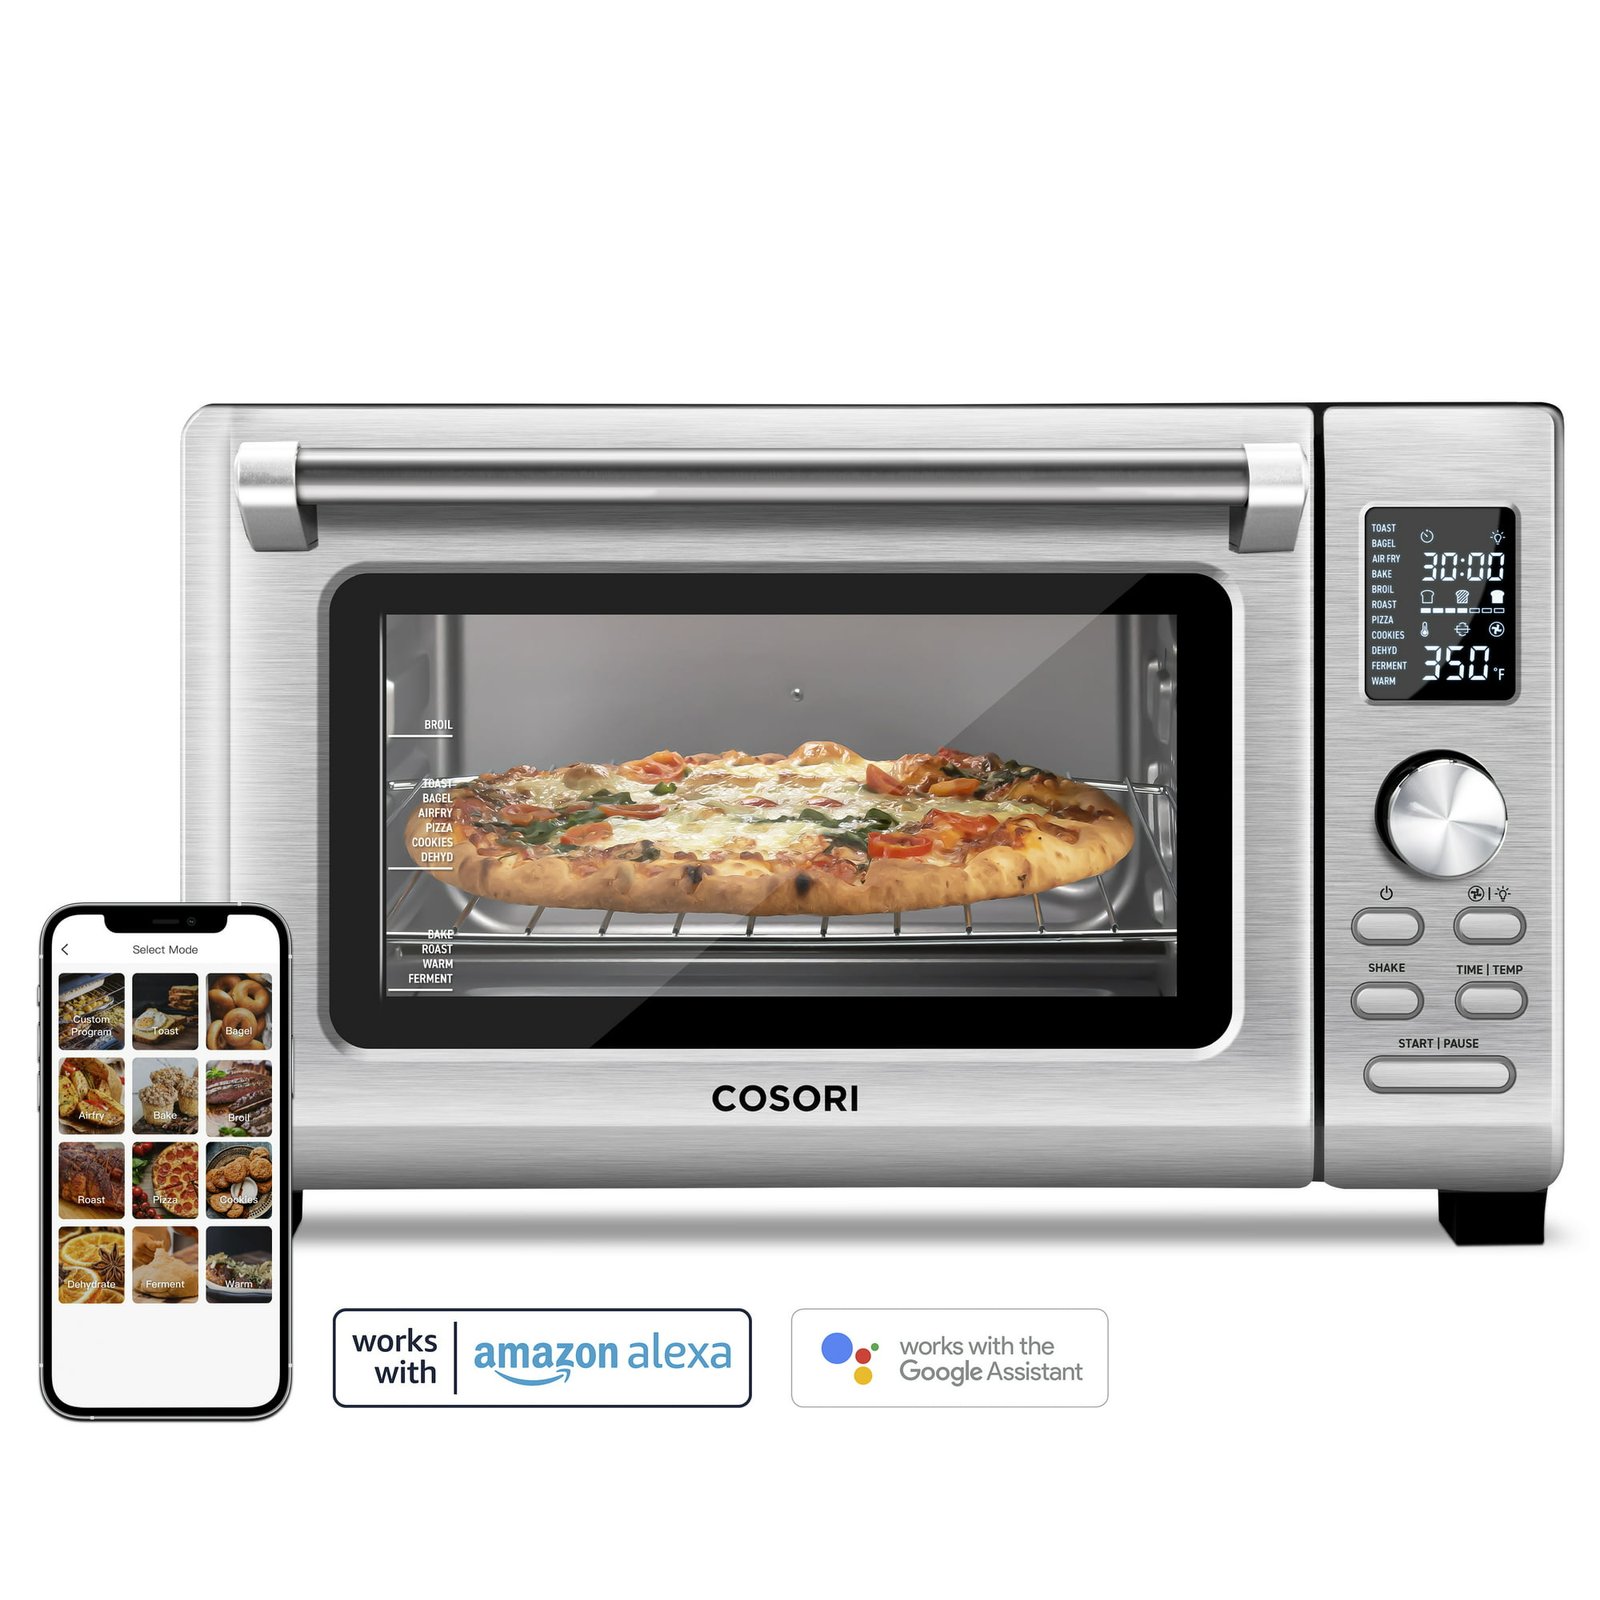 https://themarketdepot.com/wp-content/uploads/2023/01/Cosori-Smart-Air-Fryer-Toaster-Oven-CS125-AO-RXS-11-in-1-Countertop-Convection-Oven-6-Slices-of-Toast-with-25L-Capacity-30-Recipes-4-Accessories-Included-WiFi-Silver-ETL-Listed-2.jpeg